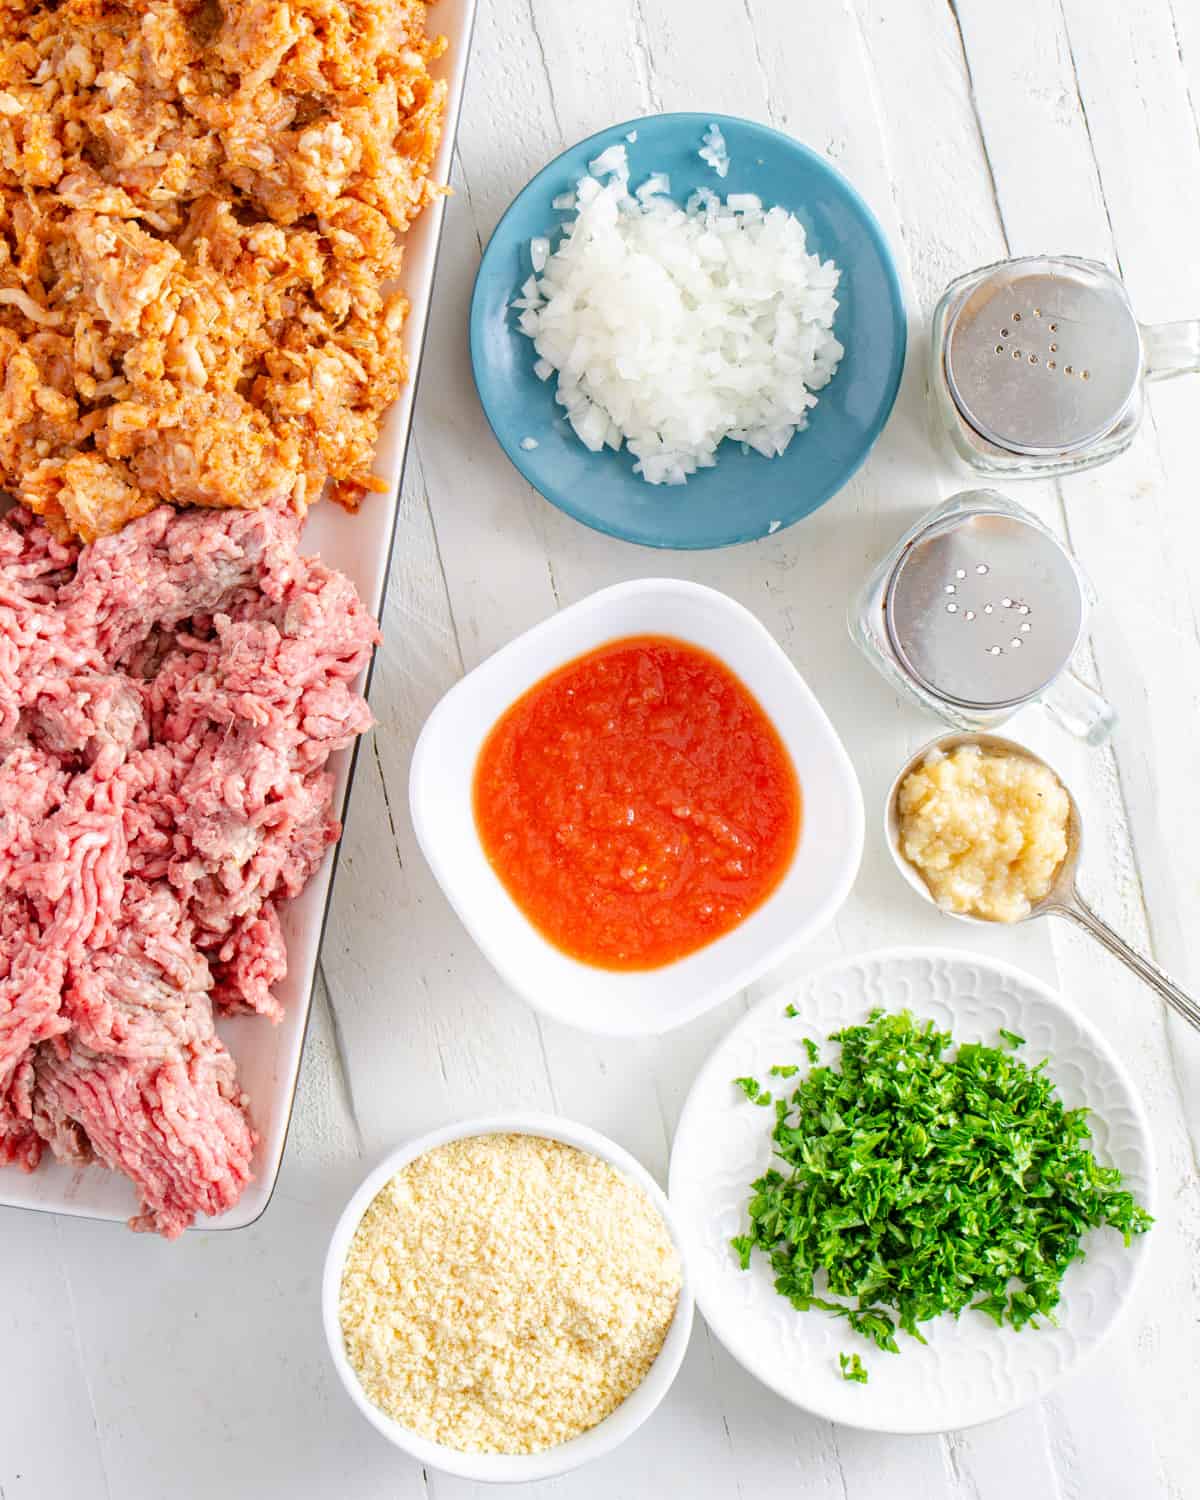 Low Carb Italian Meatball Ingredients